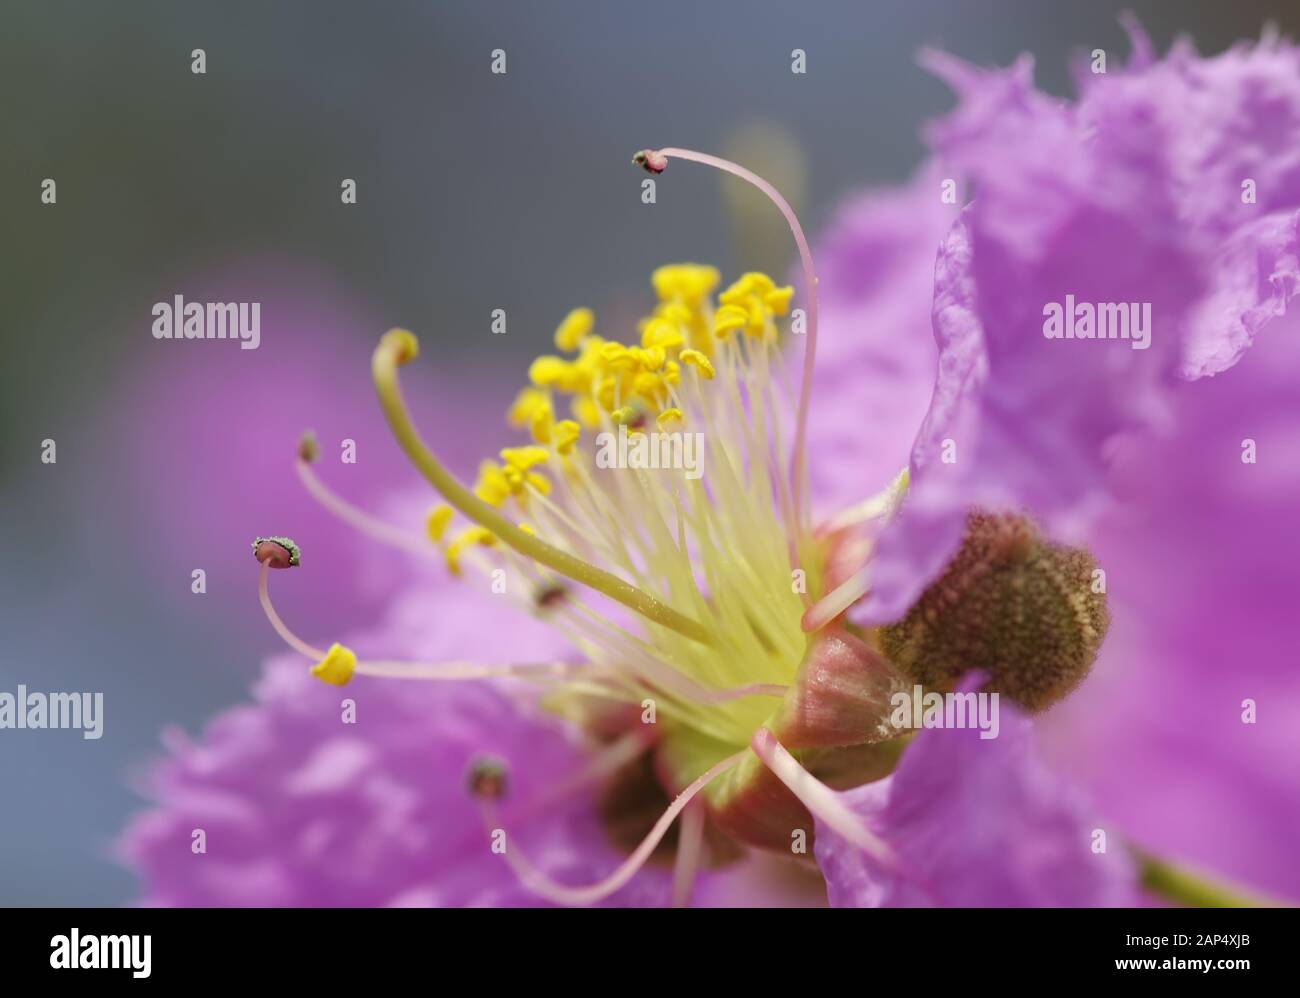 Close-up view of yellow pollen and violet flower Stock Photo